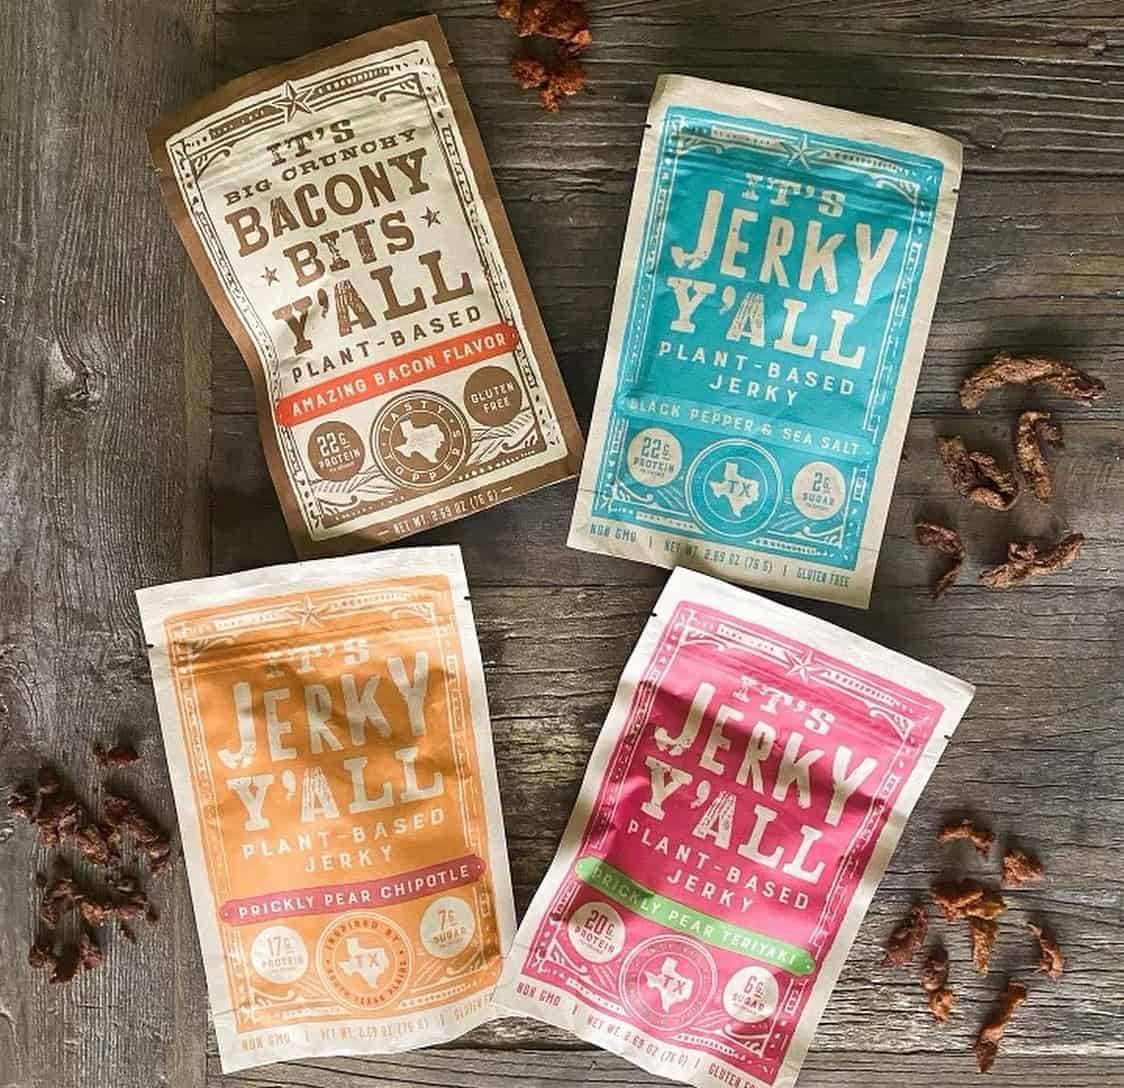 Jerky product selection